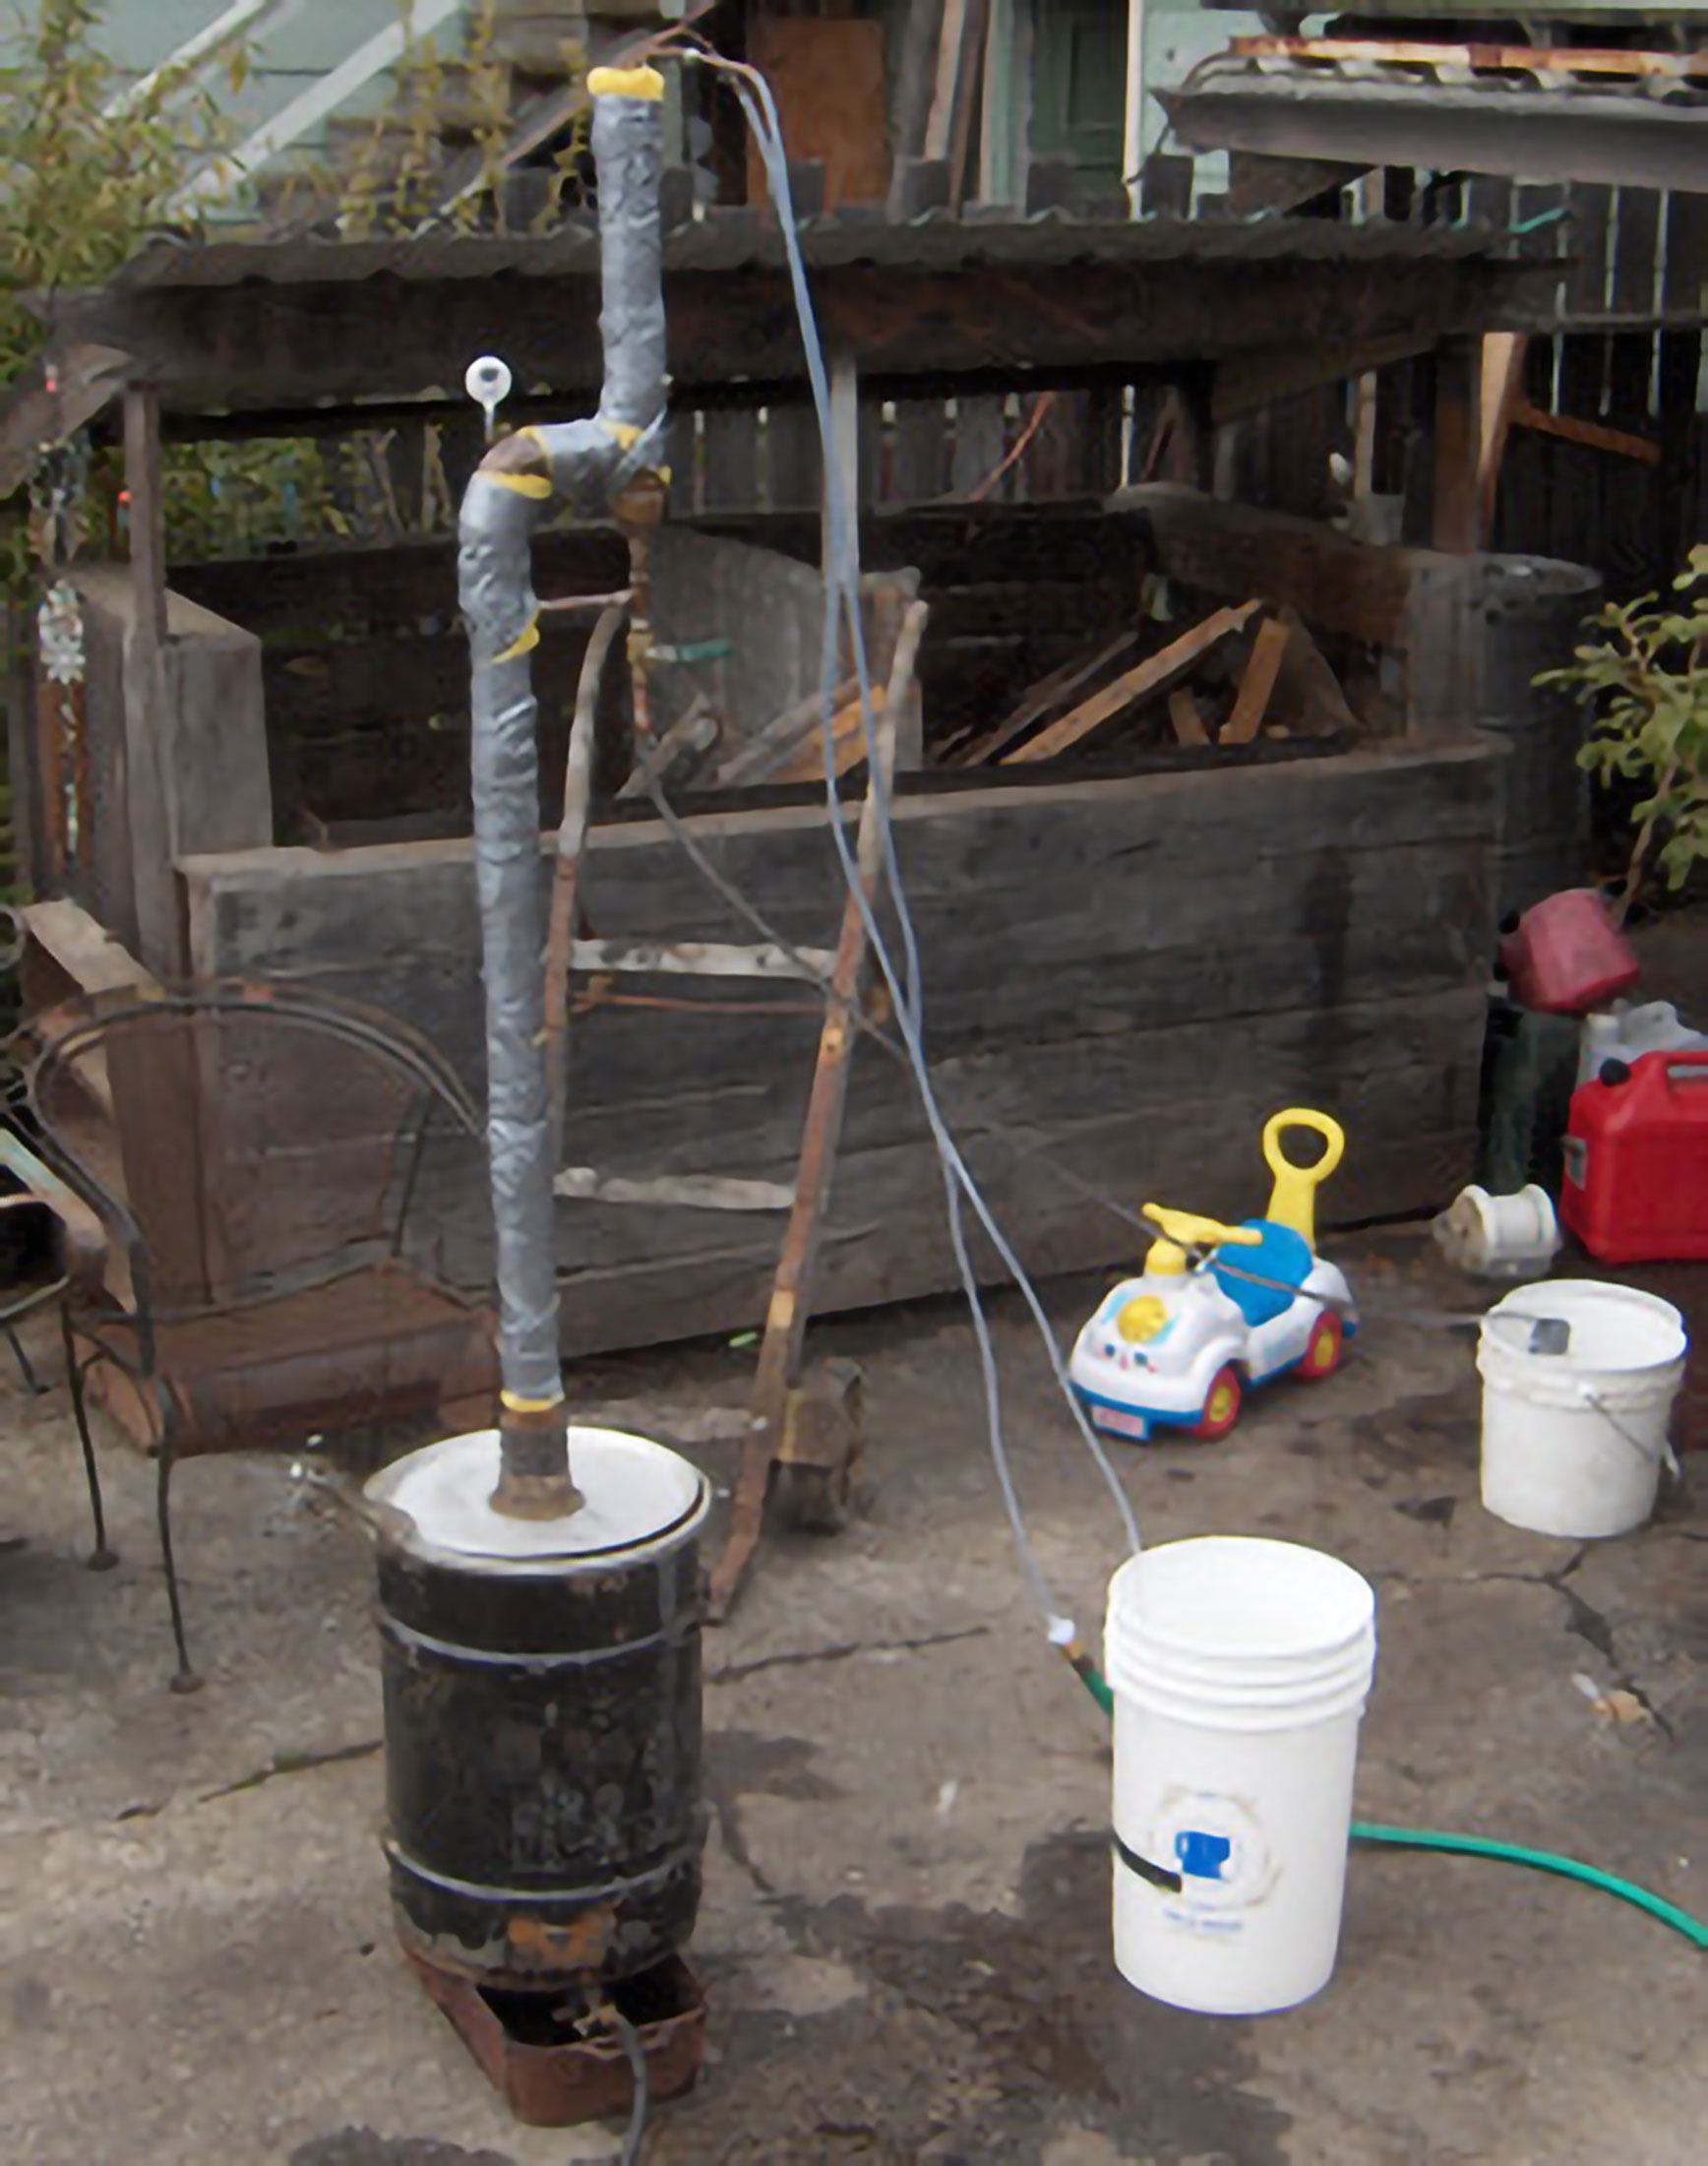 Homemade ethanol still to compare ethanol from local organic sugar beets and from imported refined cane sugar